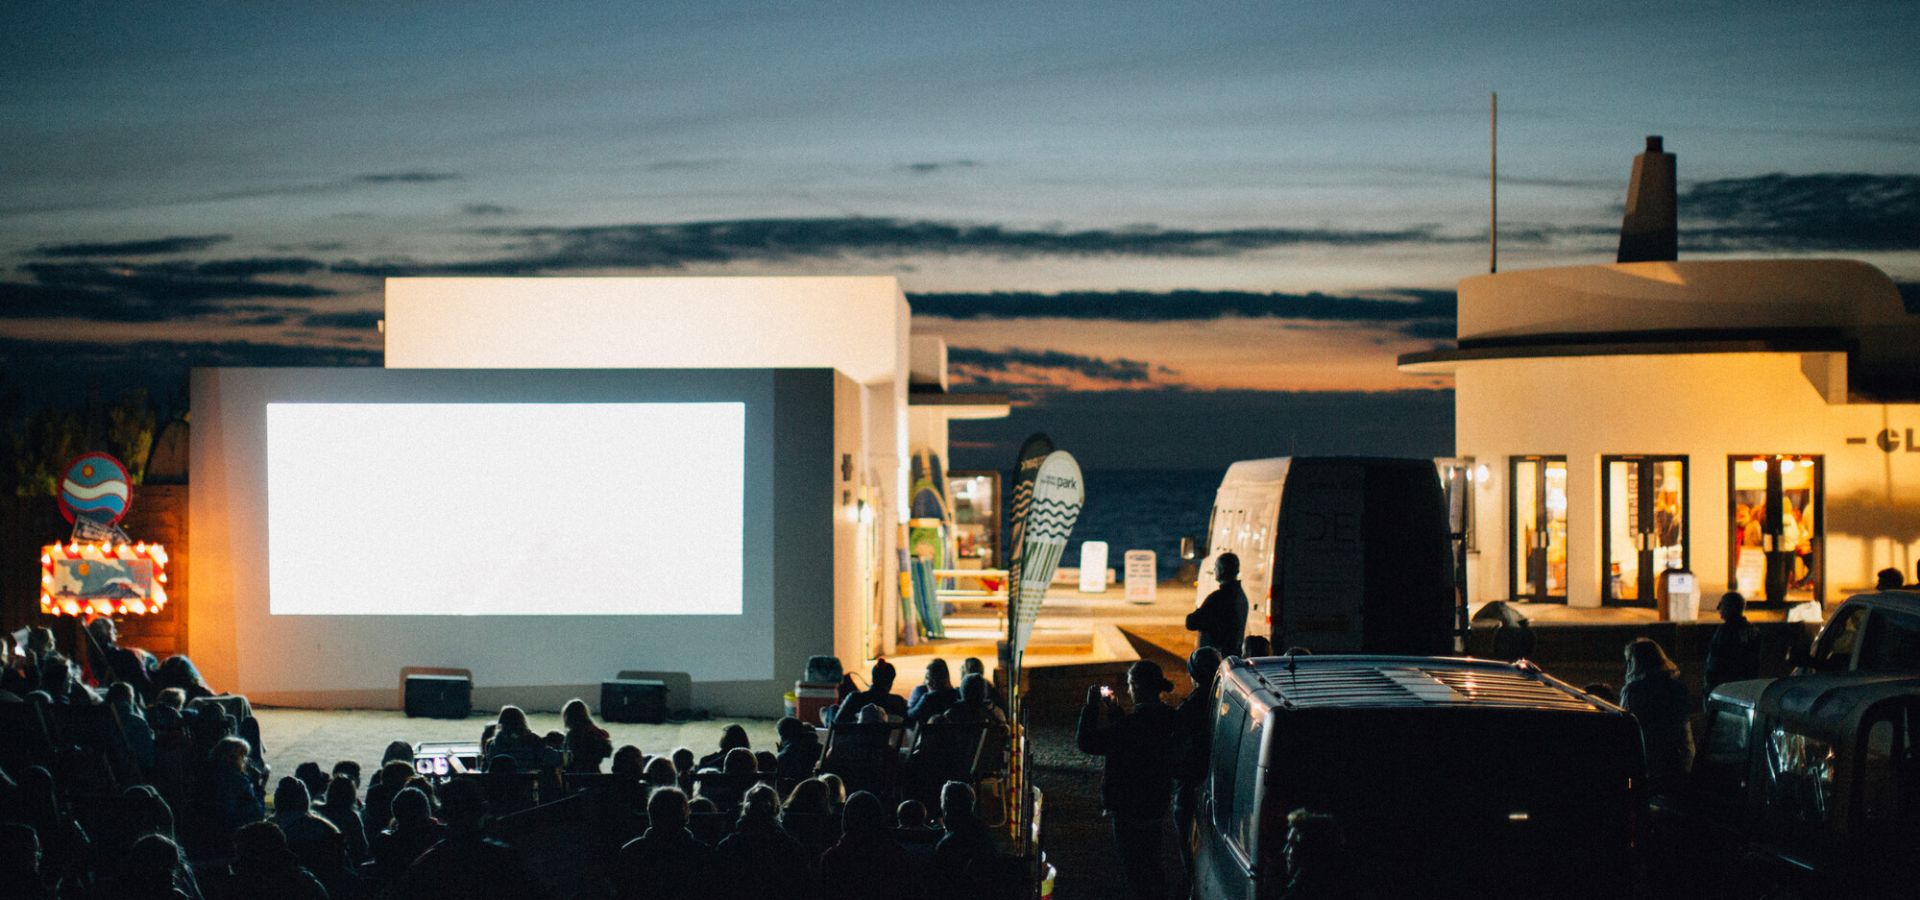 Outdoor film screening by the beach